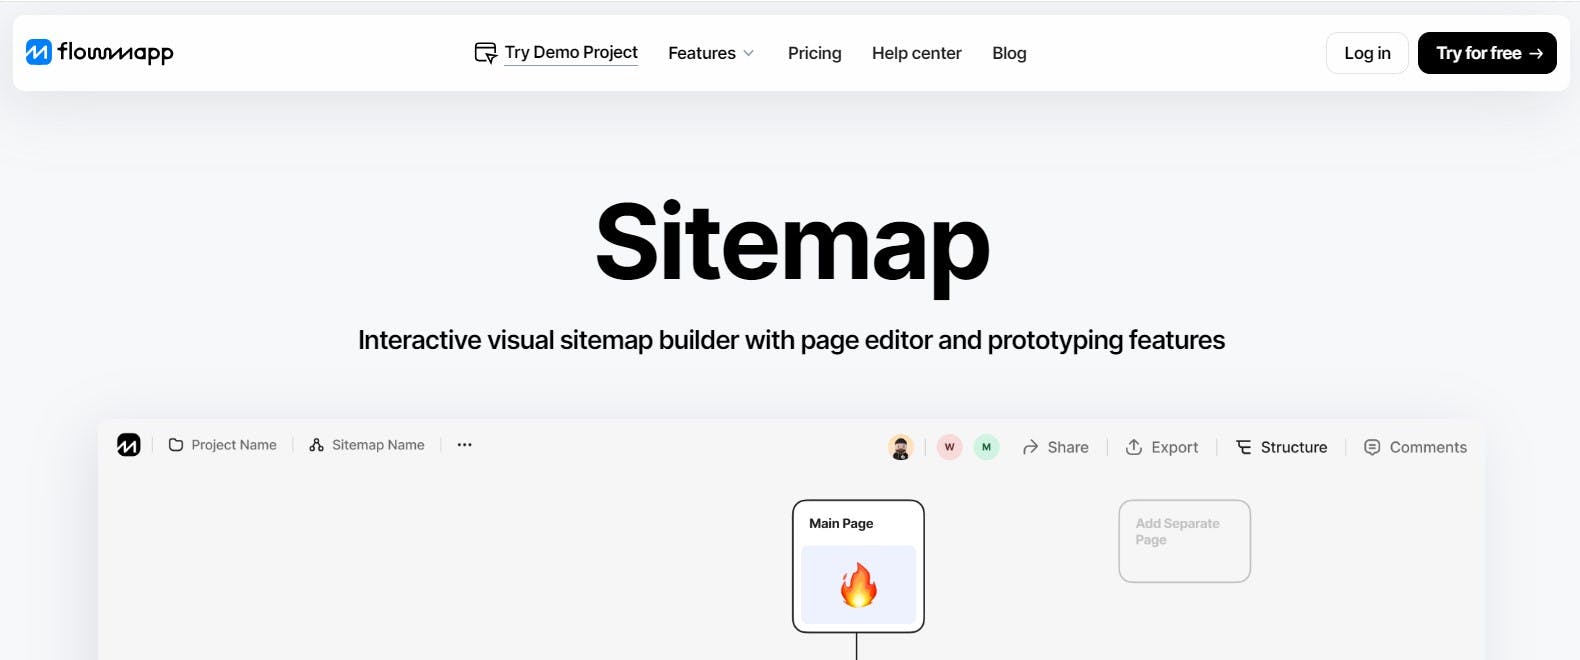 FlowMapp for various tools including visual sitemap creation